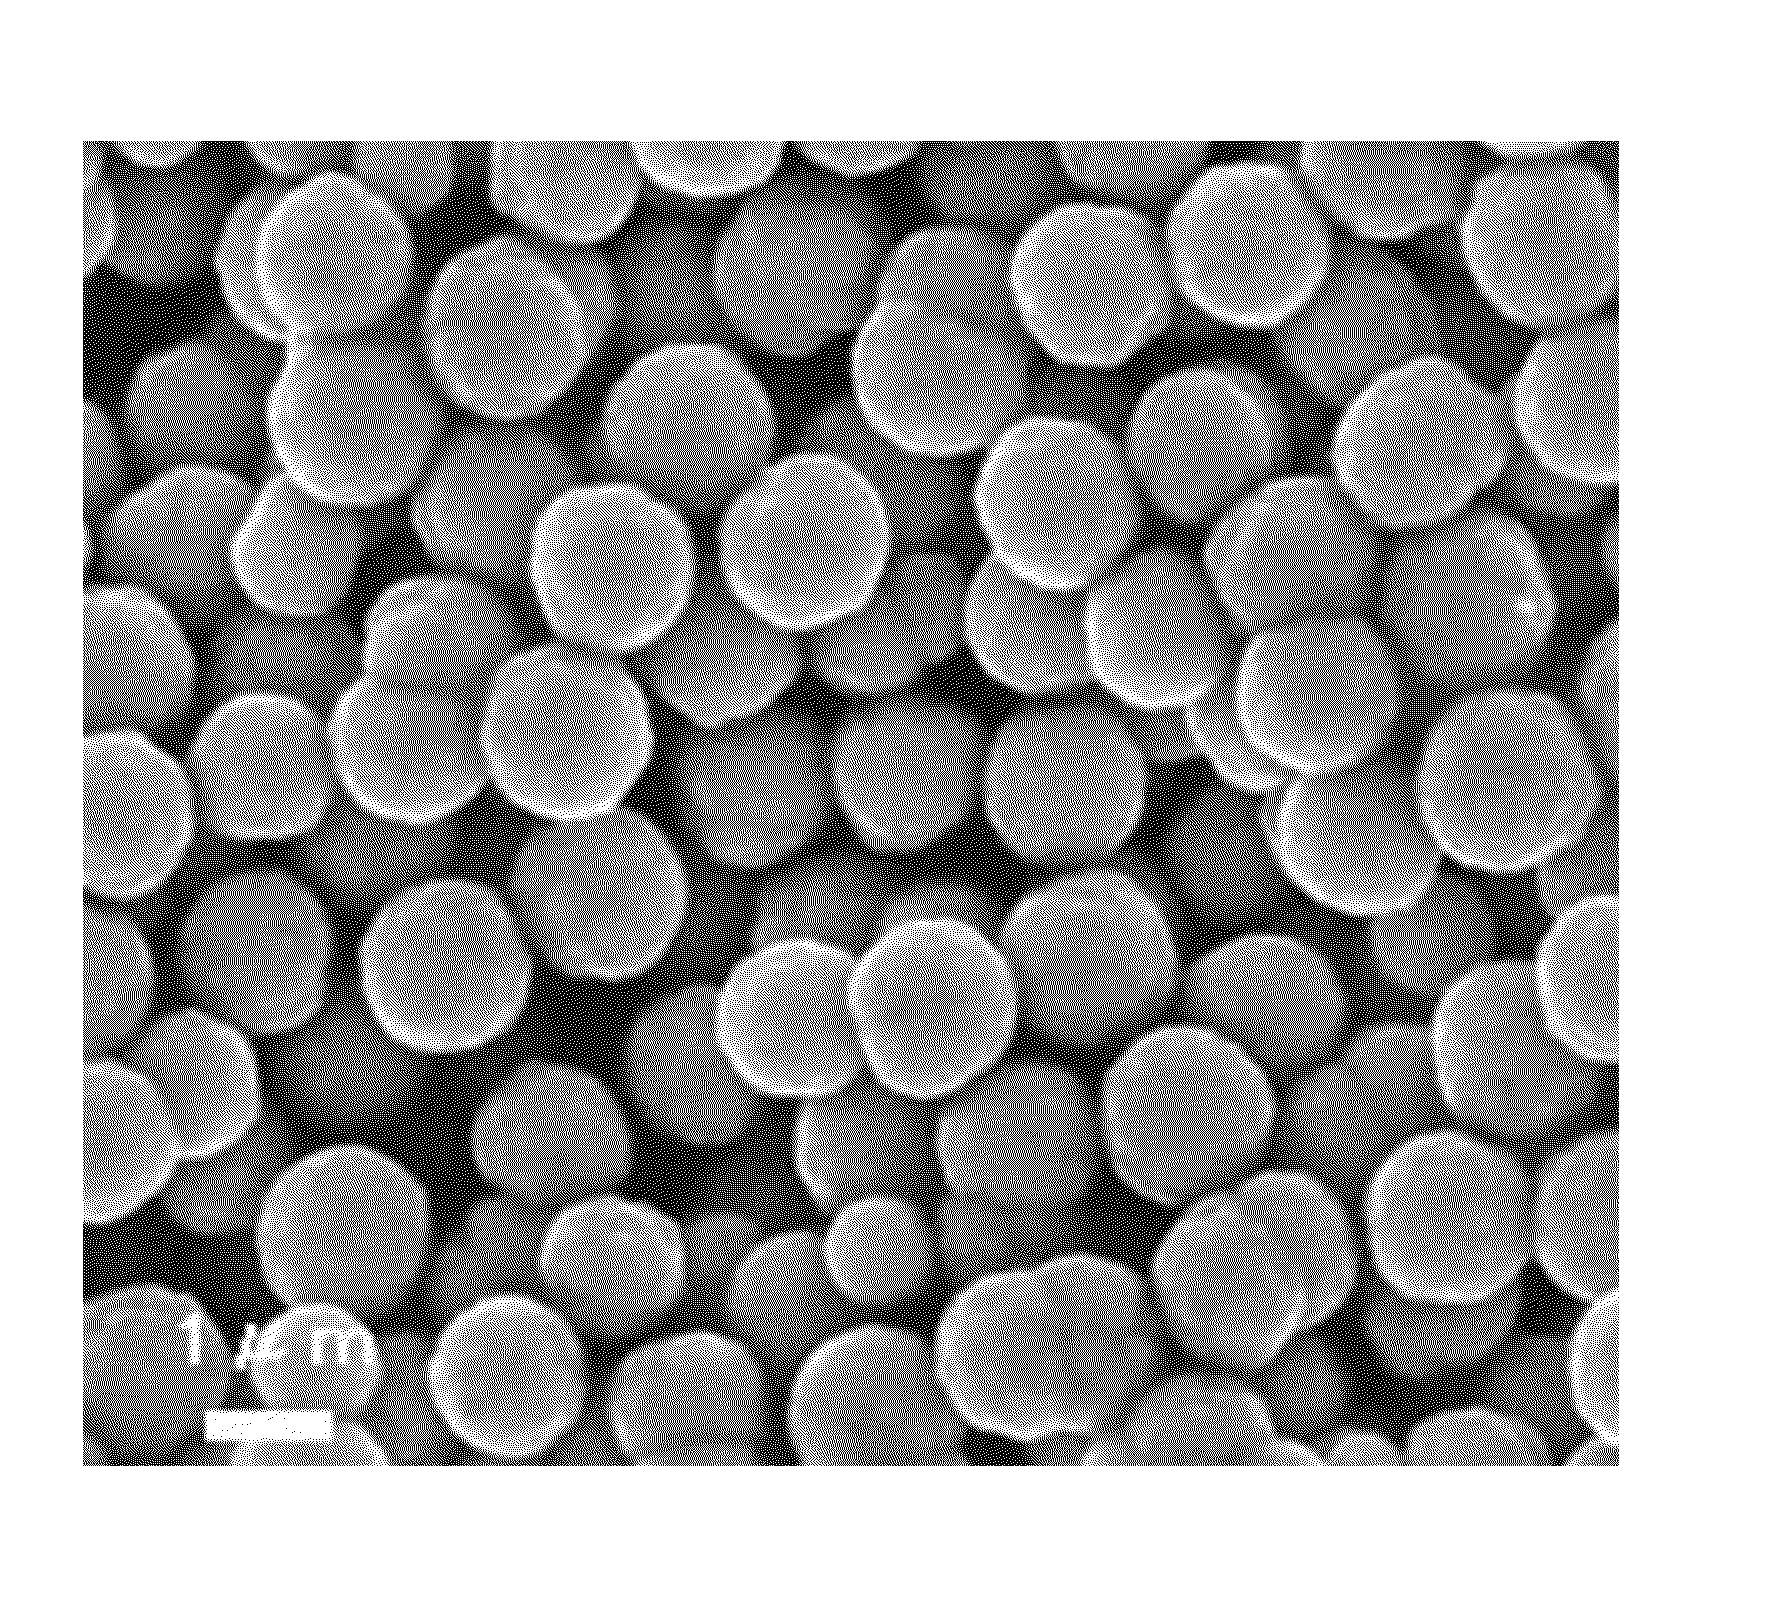 Method for producing metal microparticles